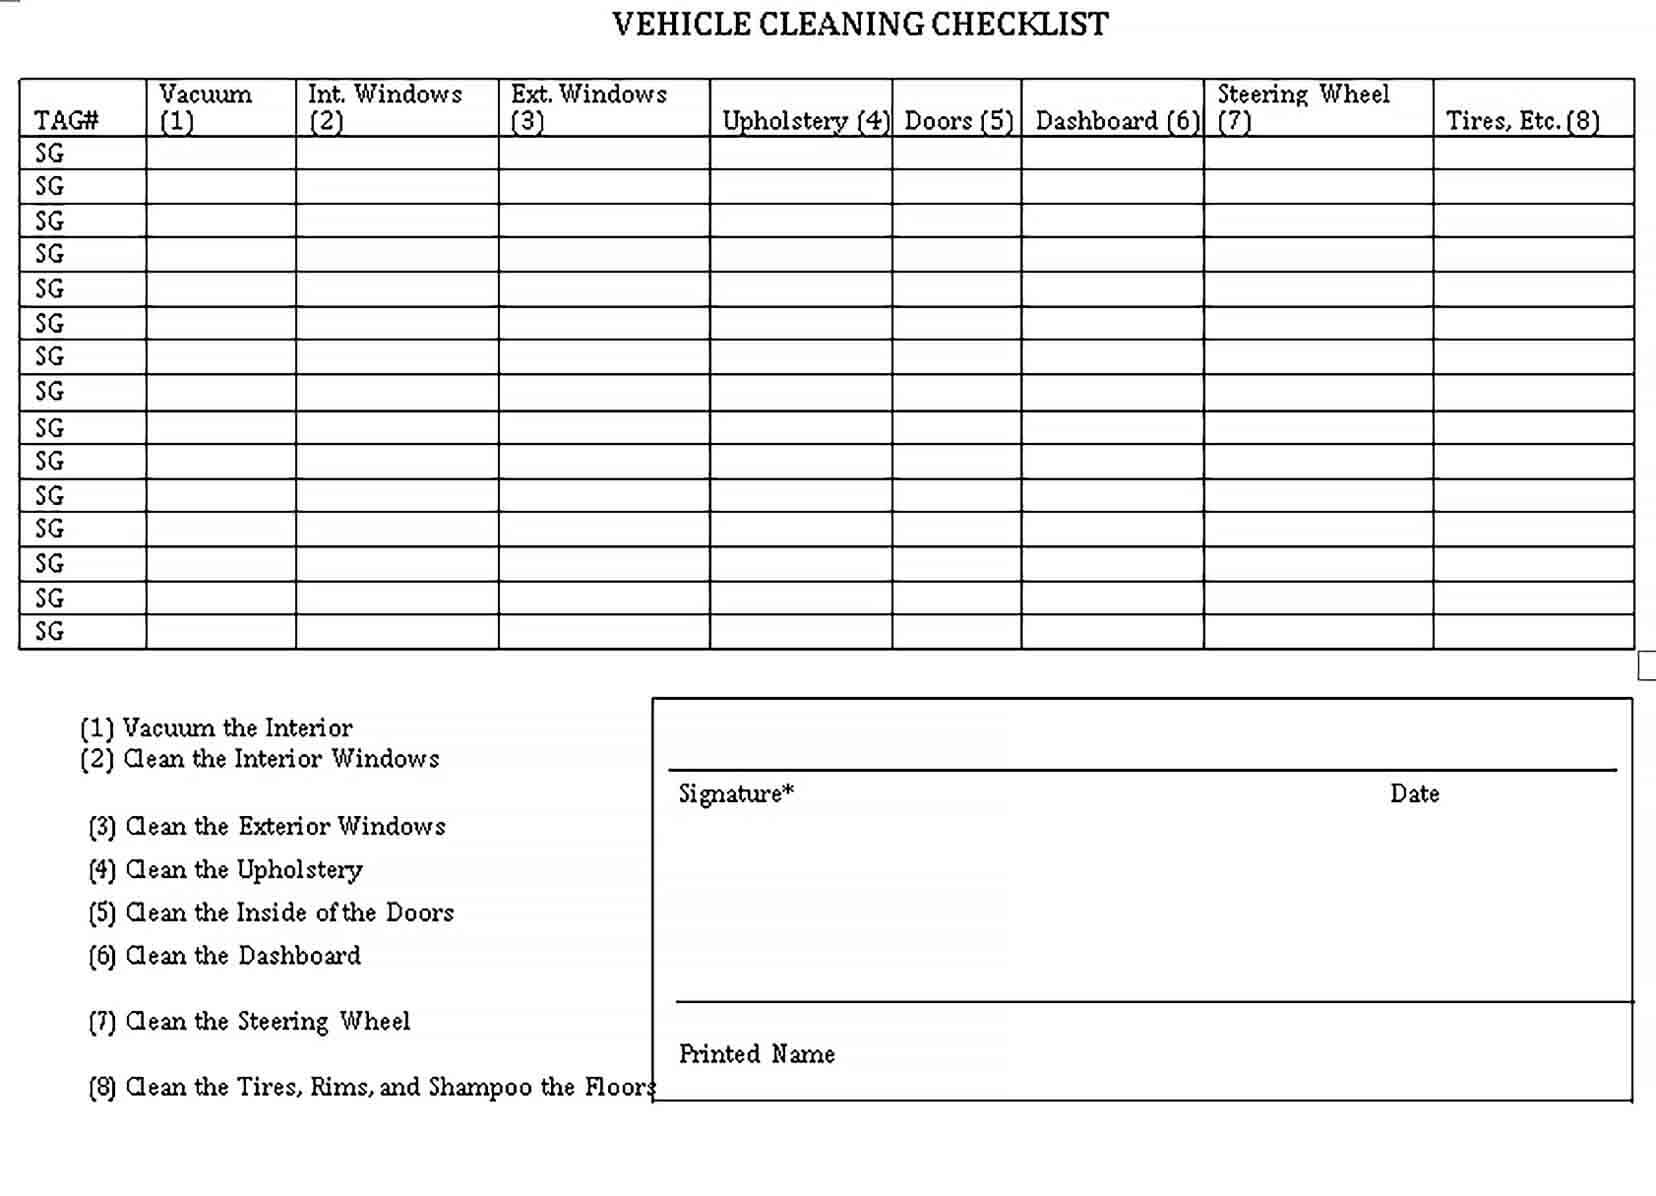 Sample Vehicle Cleaning Checklist Template